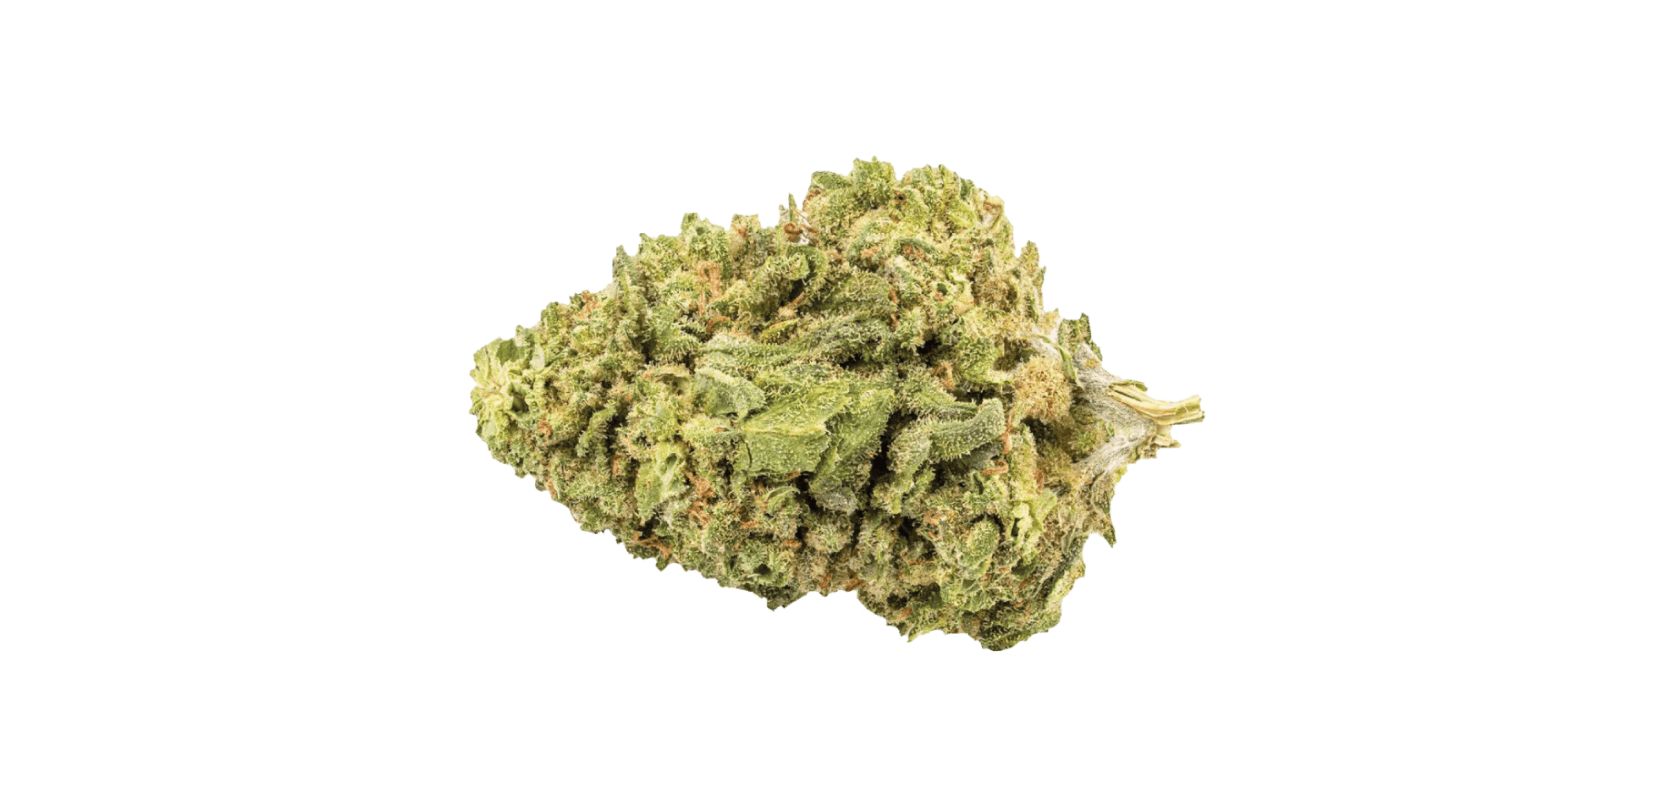 In short, Sativa weed strains are a type of marijuana plant known for their uplifting and energizing effects. 